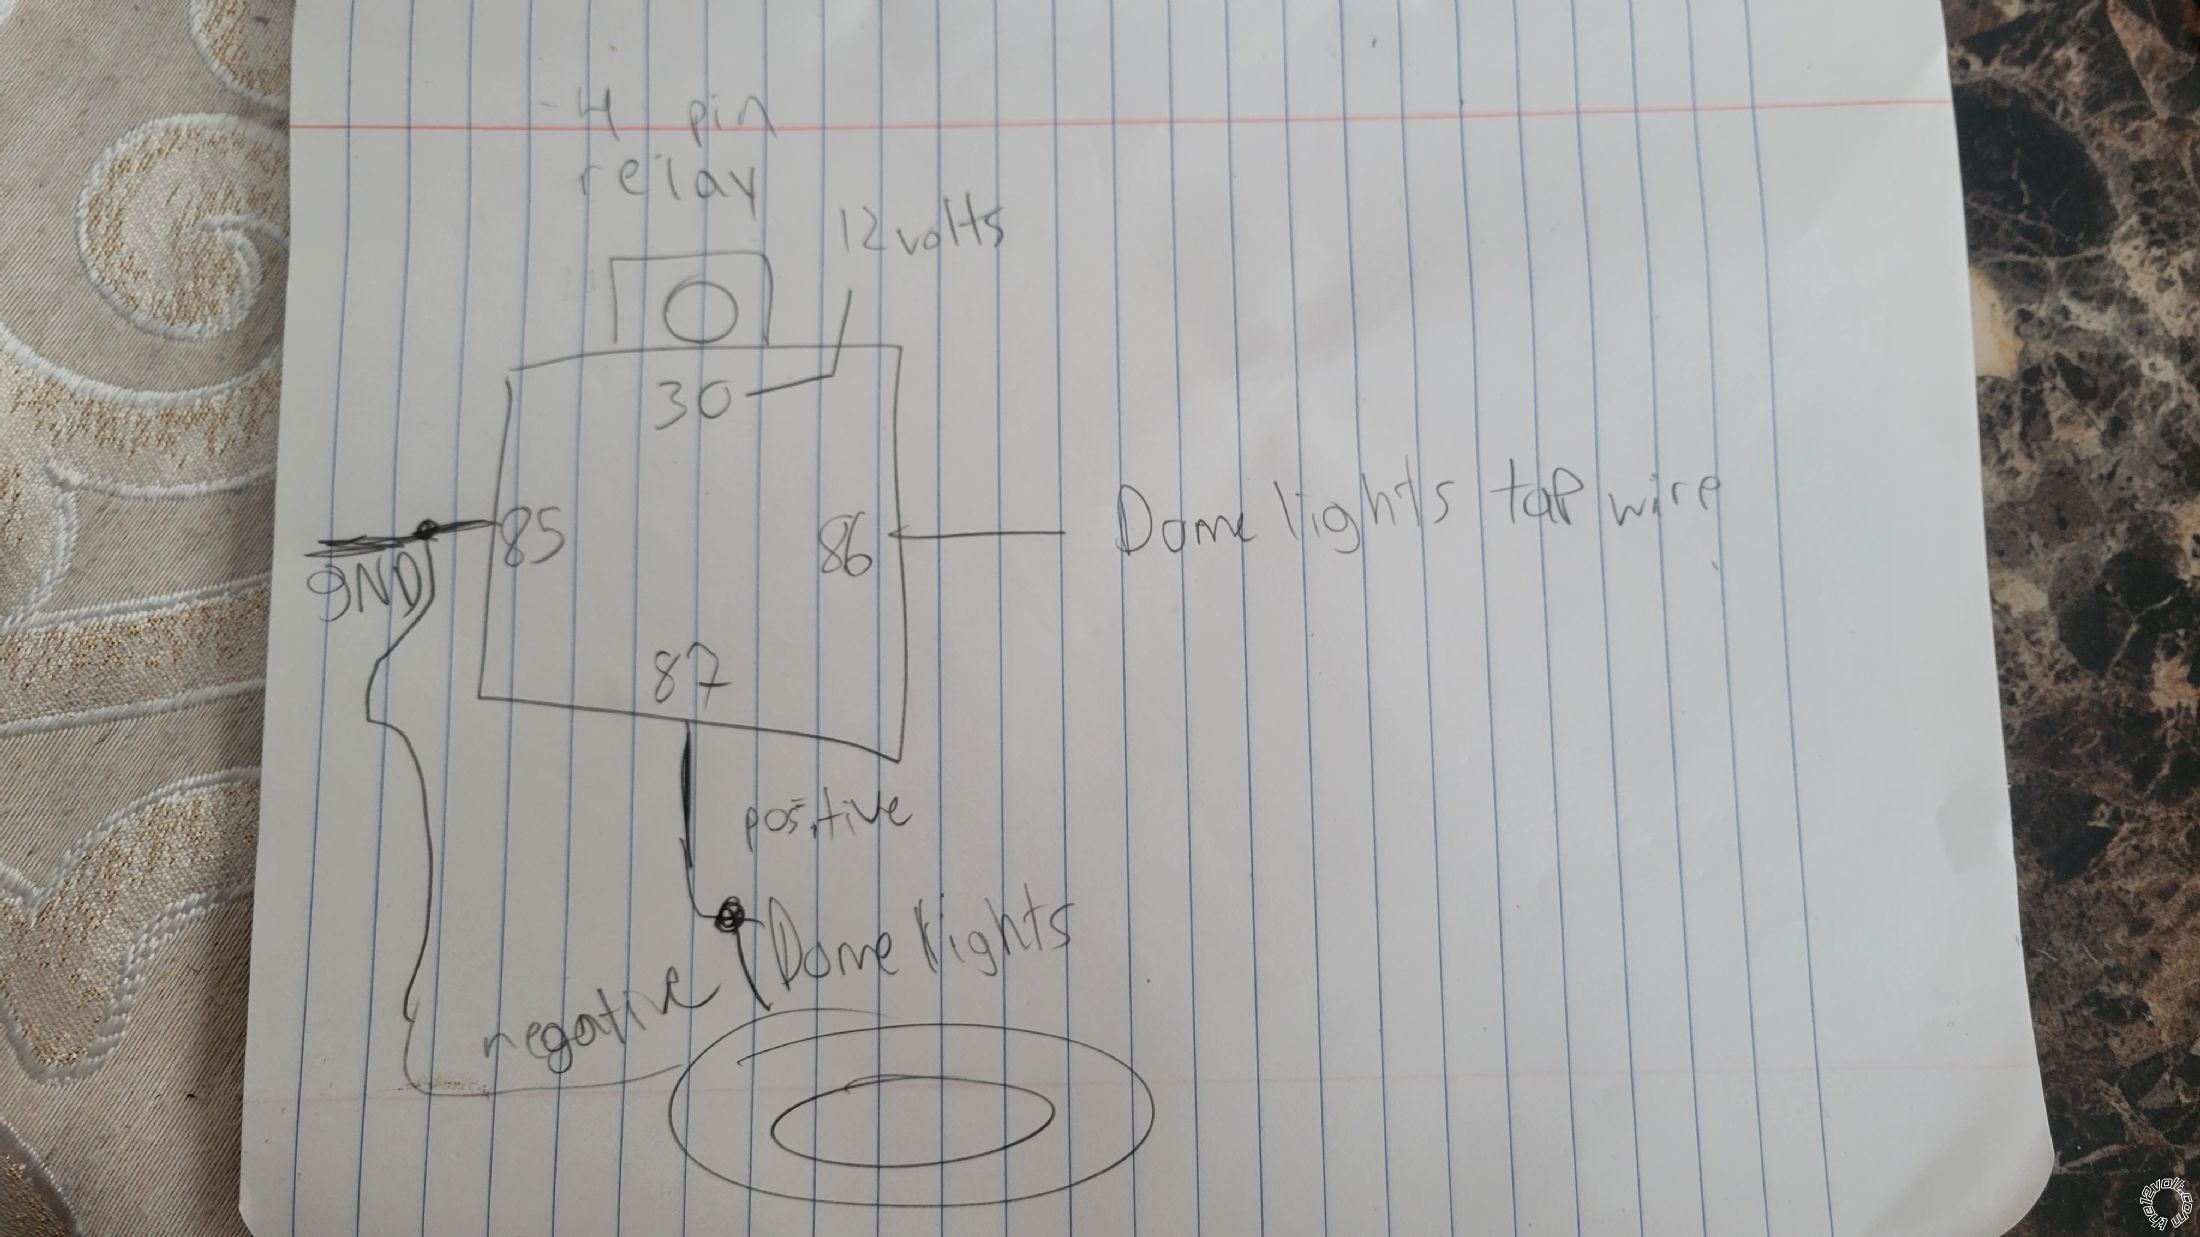 Rock Lights To Dome Lights Using Relay, Relay Buzzes While Dimming -- posted image.